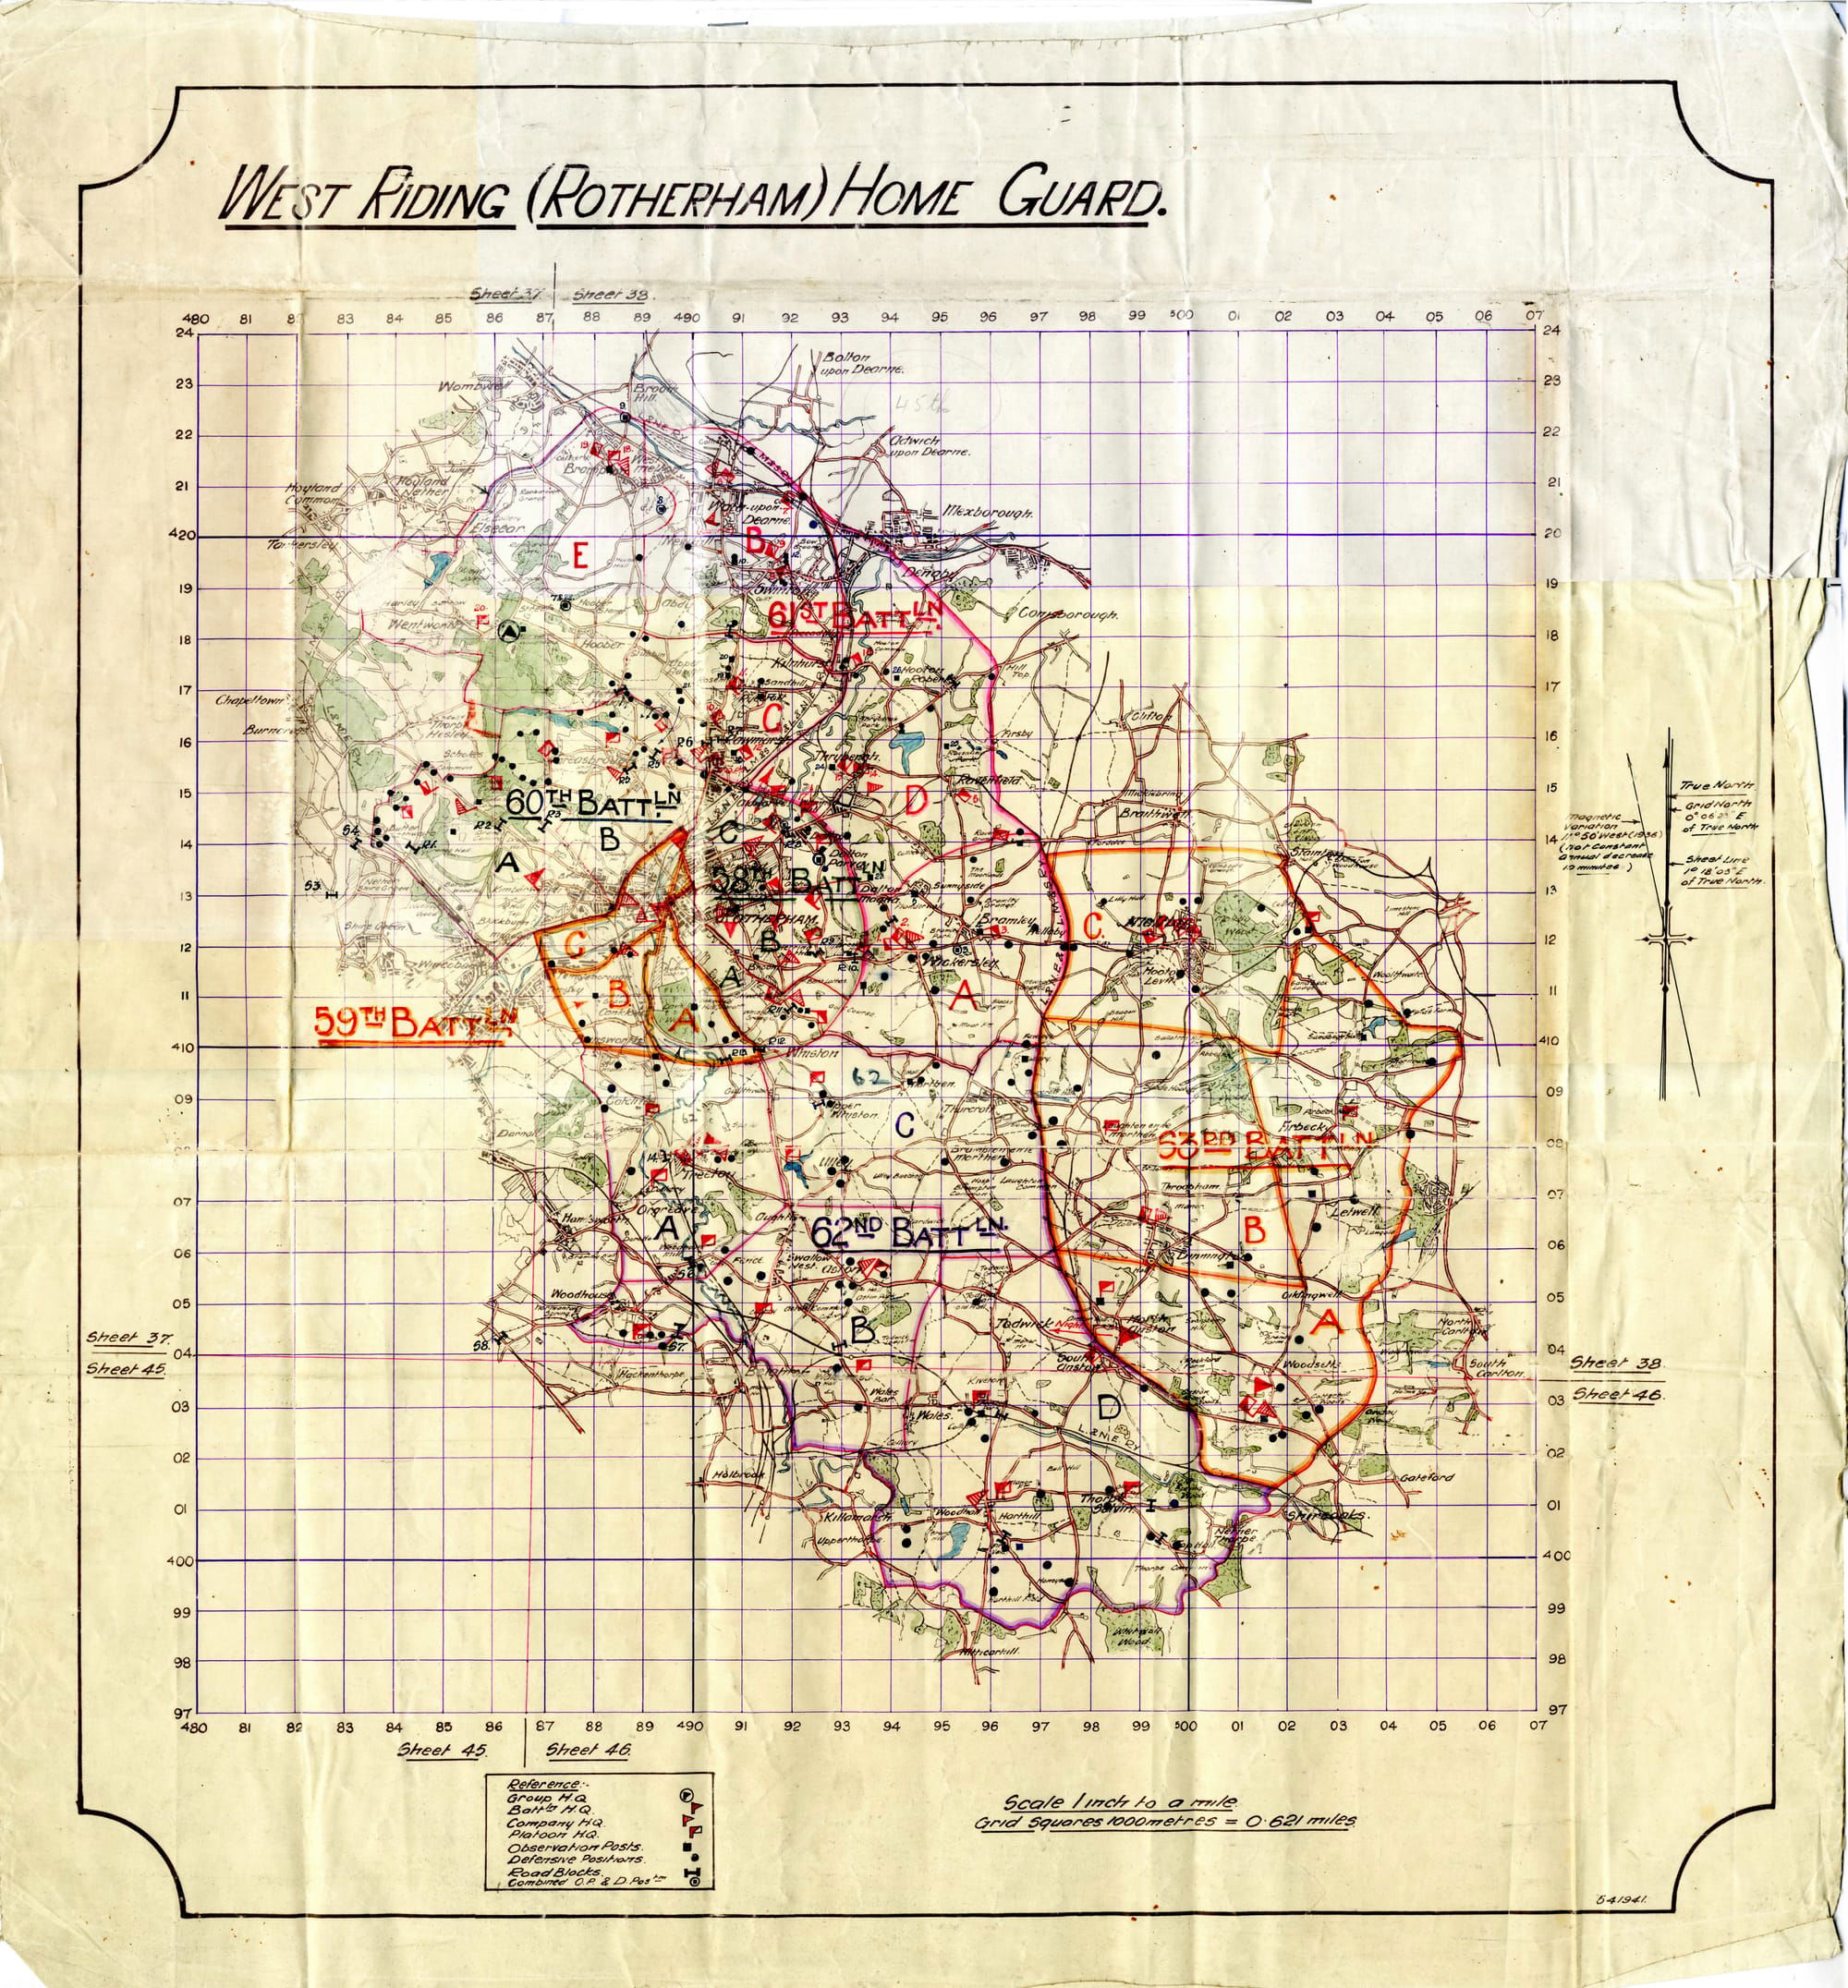 WW2 Home Guard Map of Rotherham Showing Numbered Battalion Locations